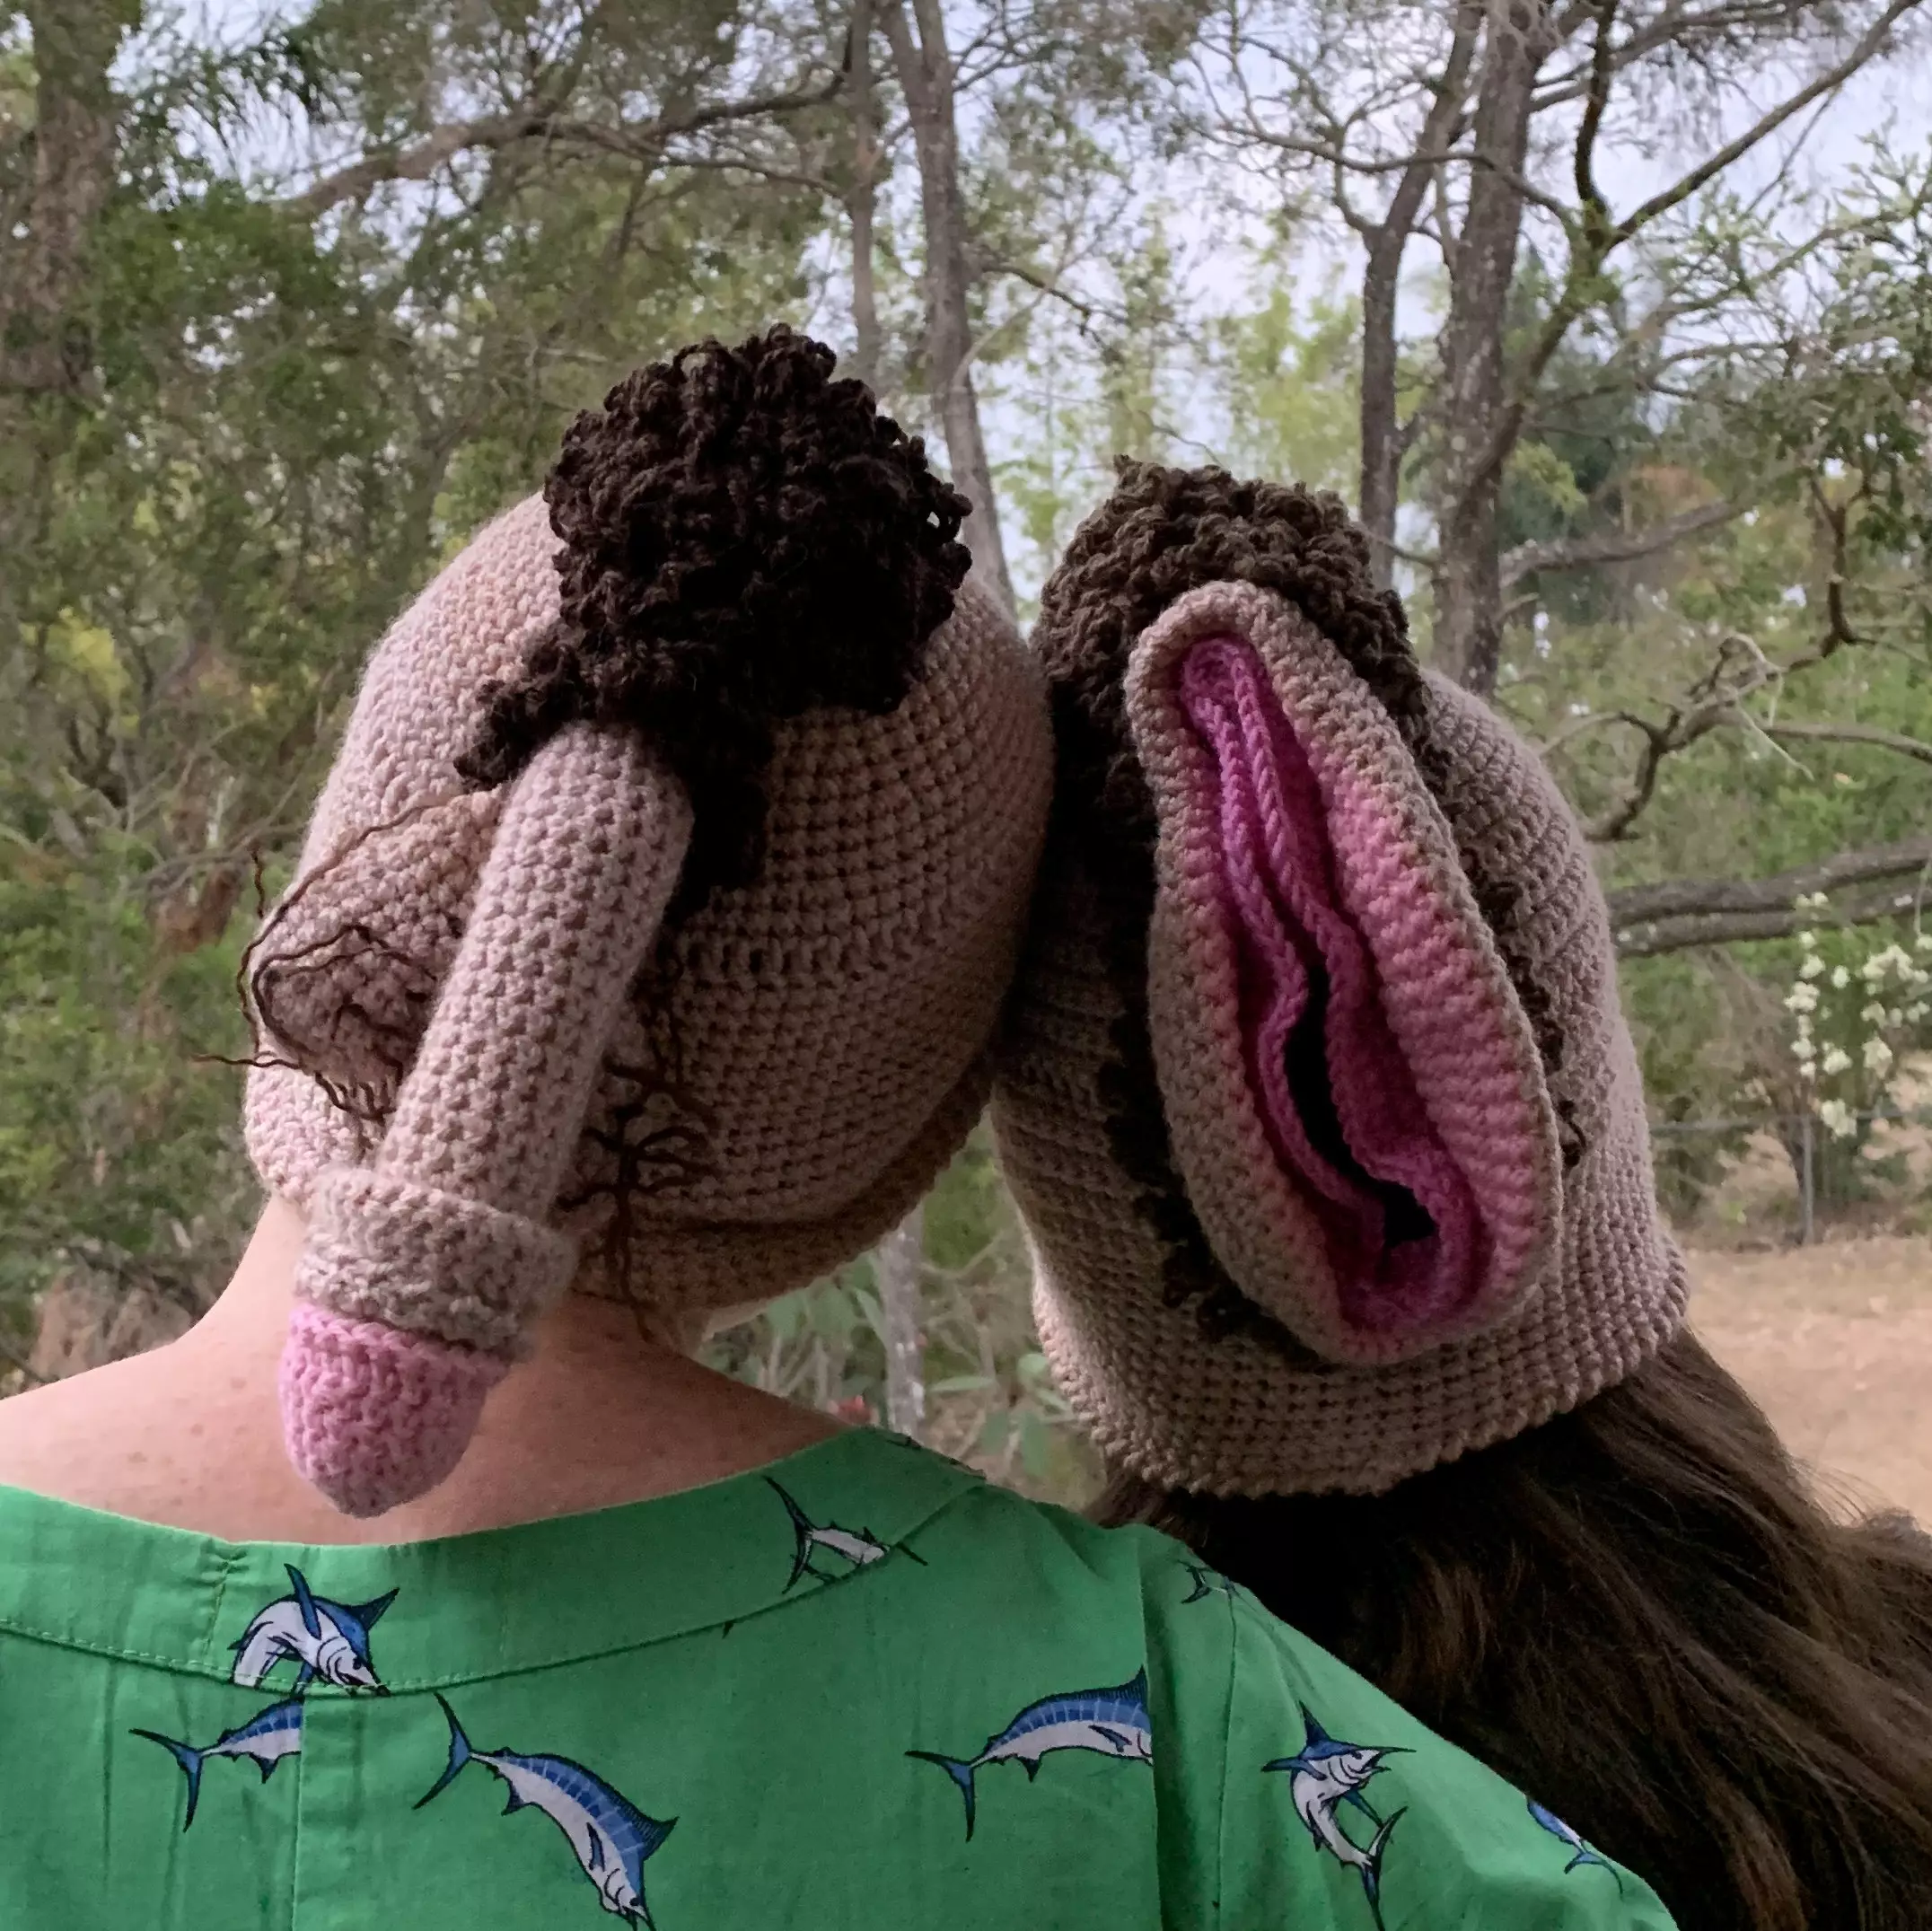 Lulu has even made vulva and penis hats.